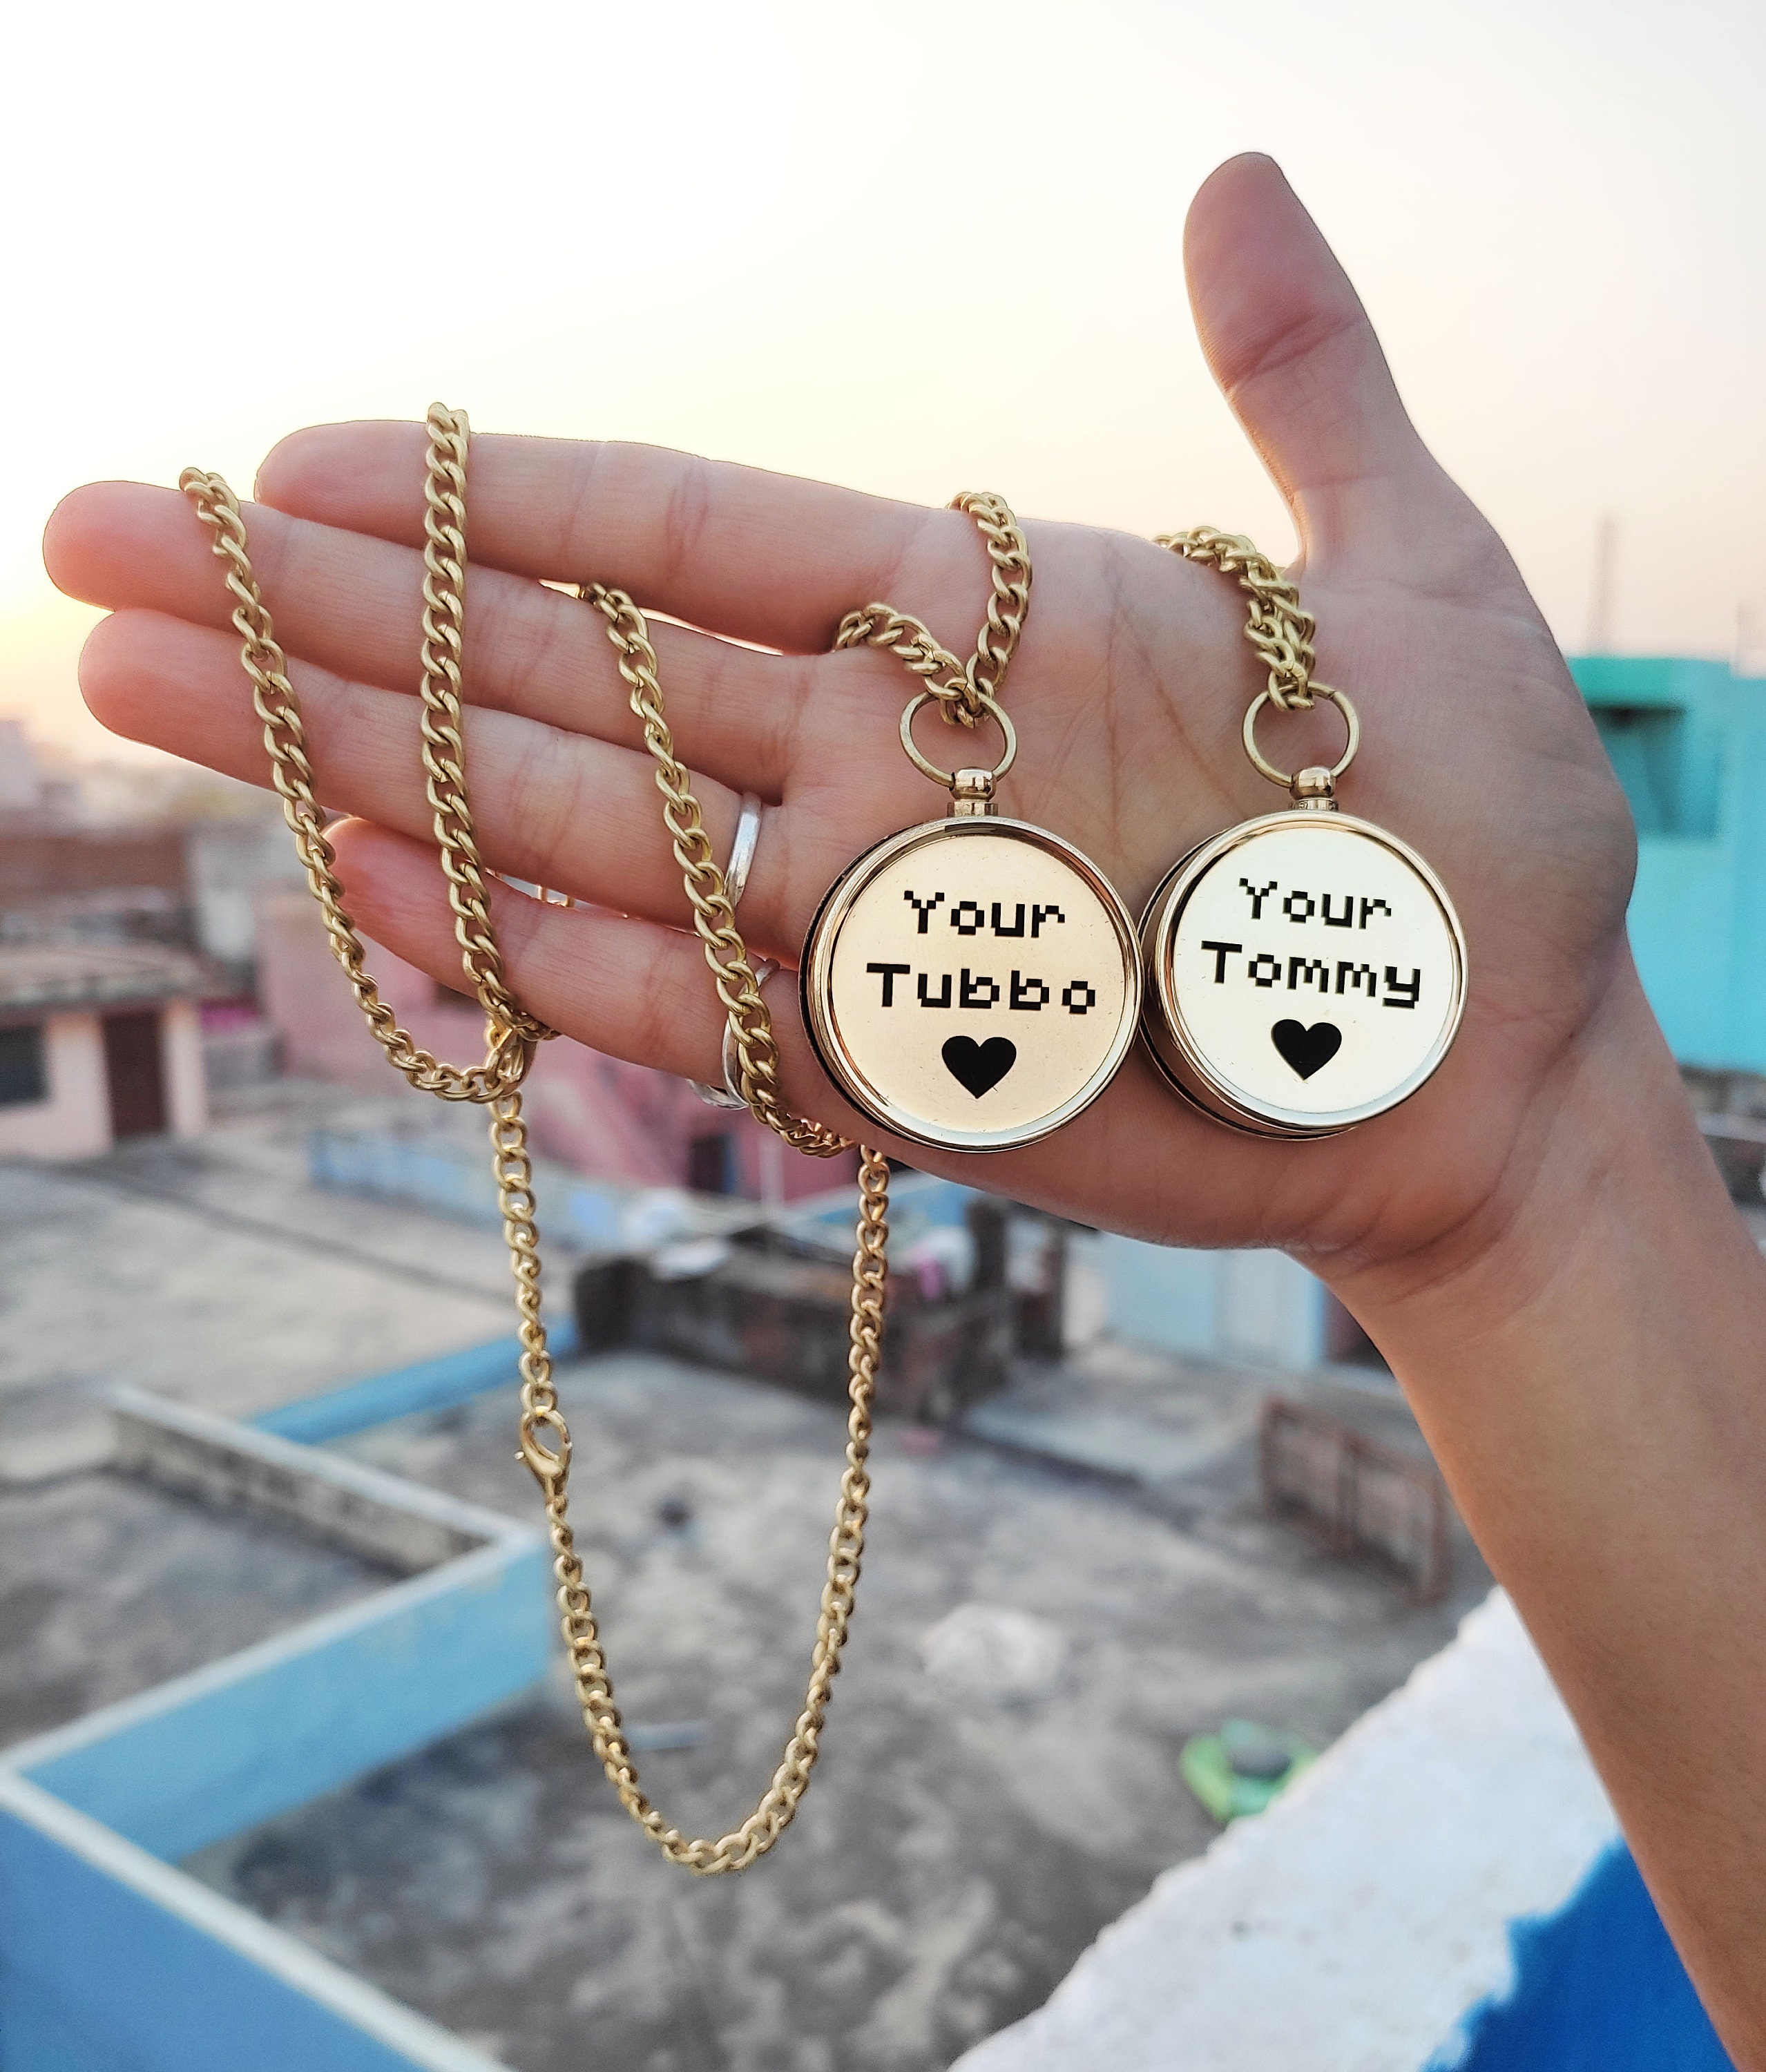 Y Your Tubbo and Your Tommy Friendship Necklaces Friends Locket Compass Pair